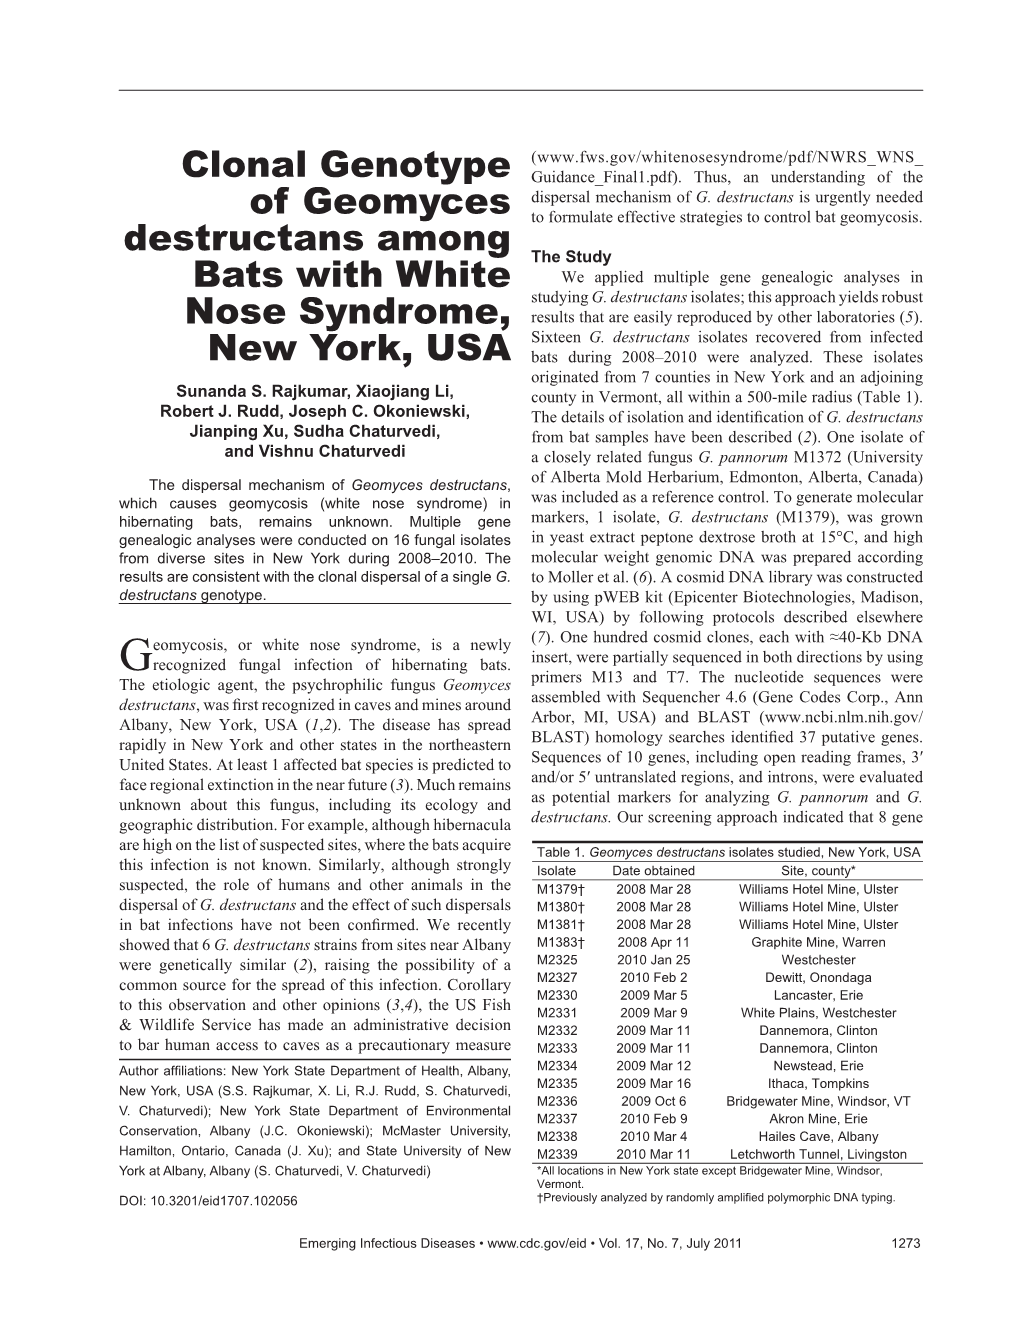 Clonal Genotype of Geomyces Destructans Among Bats with White